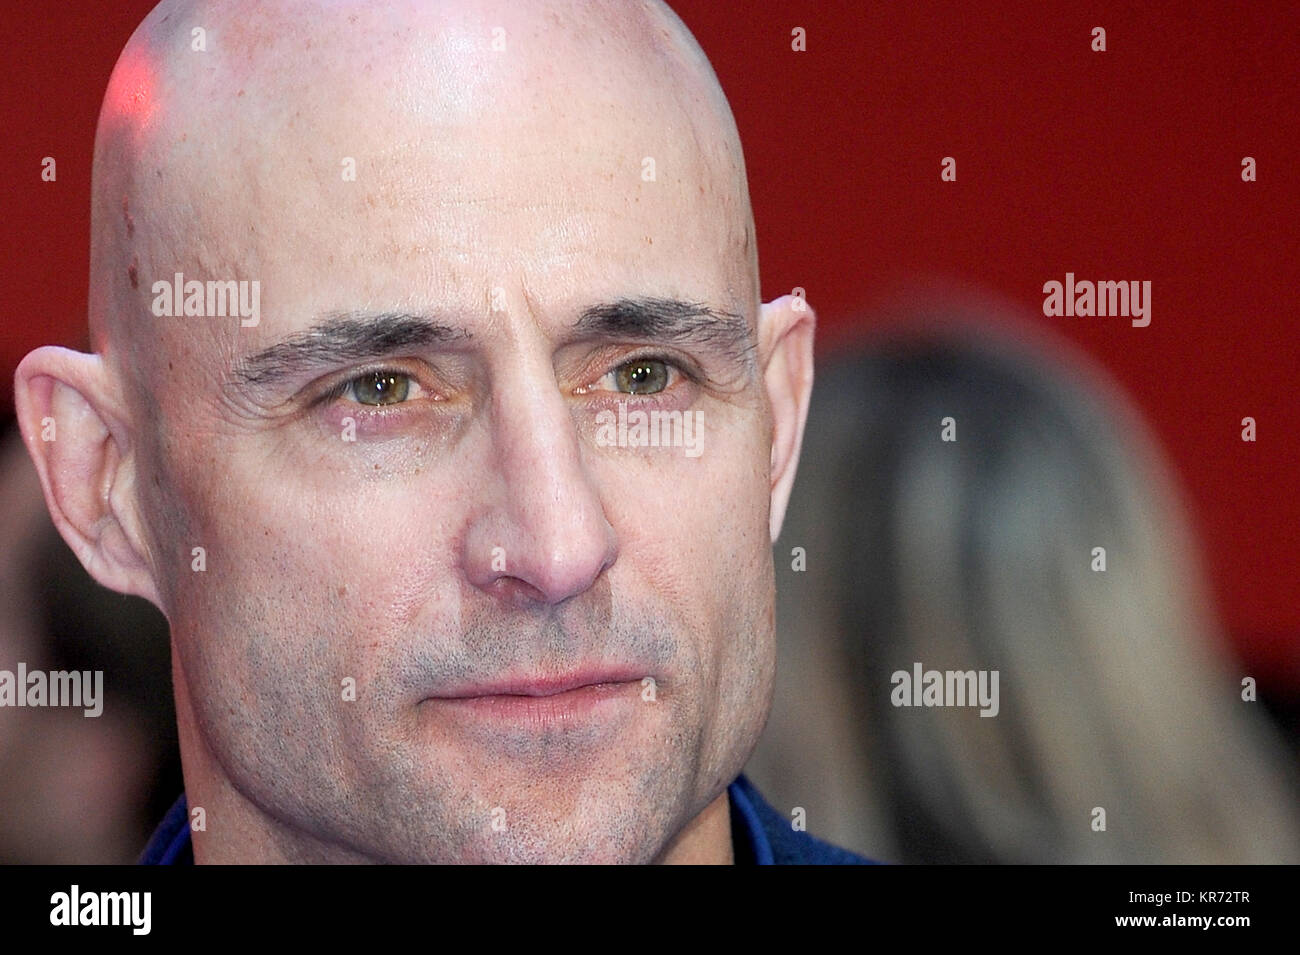 Mark Strong attends the European premiere of Captain America: Civil War at Westfield Shopping Centre in London. 26th April 2016 © Paul Treadway Stock Photo